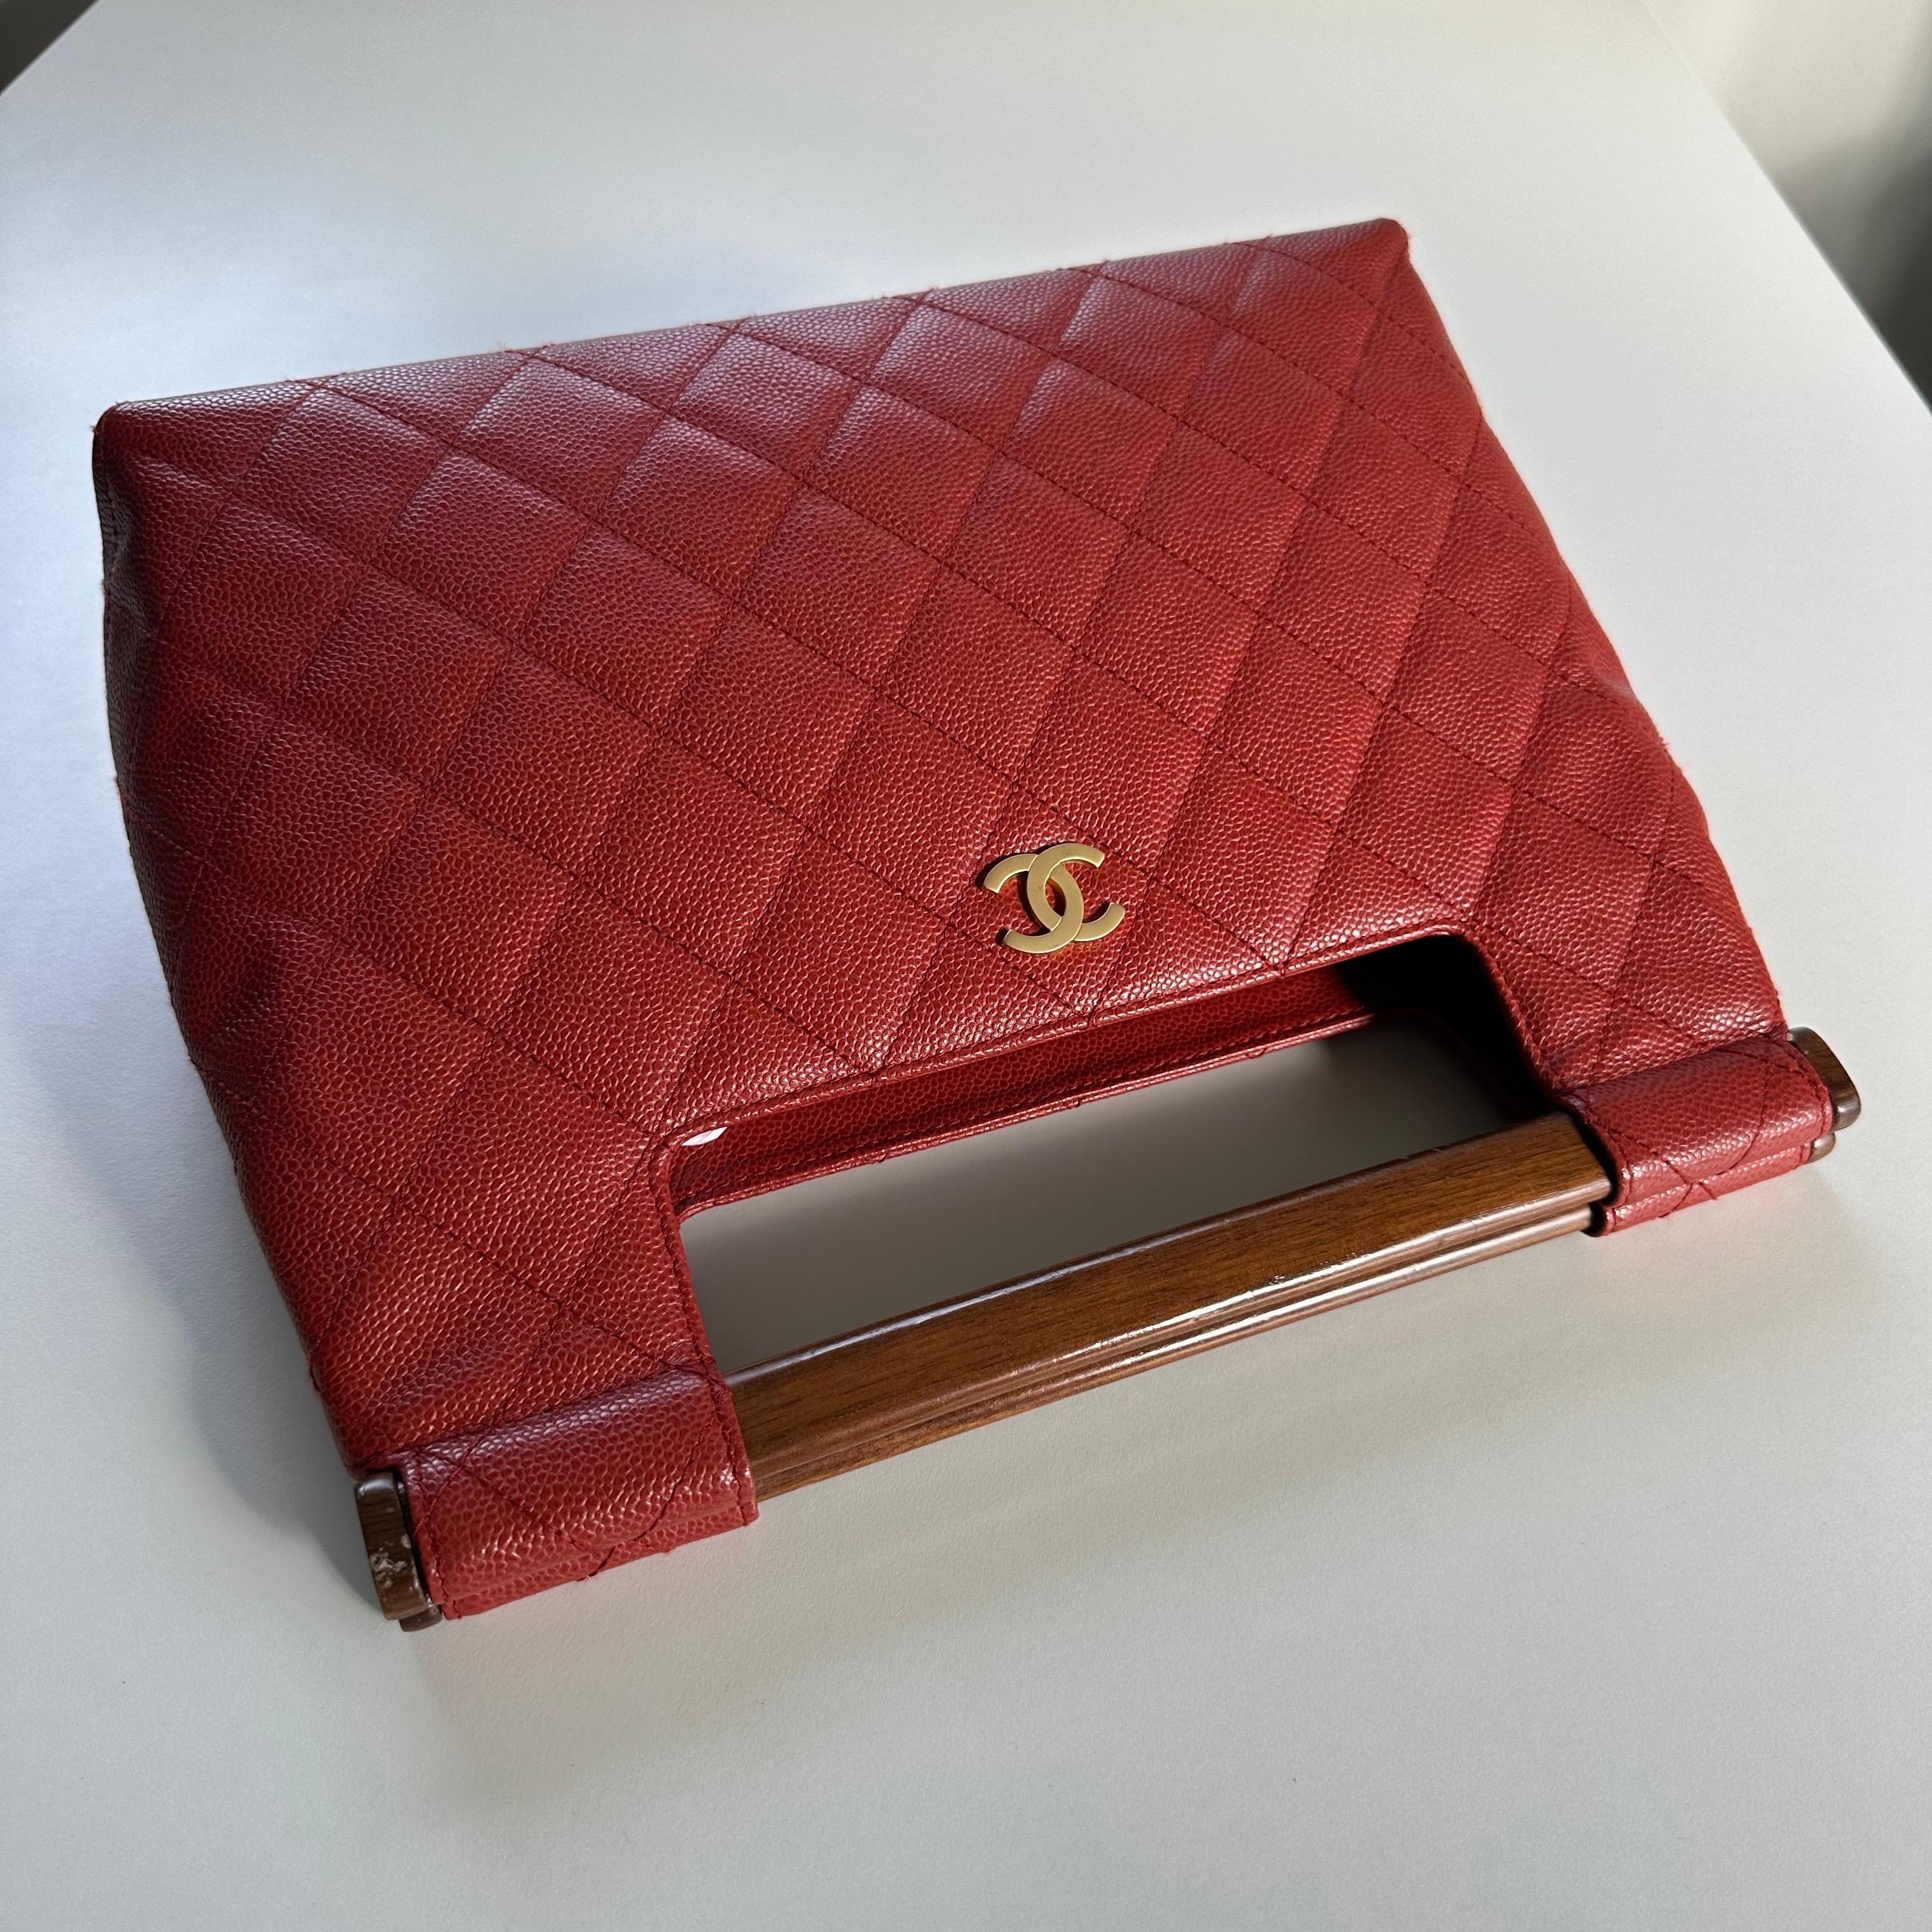 Chanel 2003 Holz Top Handle Rare Red Caviar Jumbo Kelly Envelope Clutch Tote Bag im Angebot 3